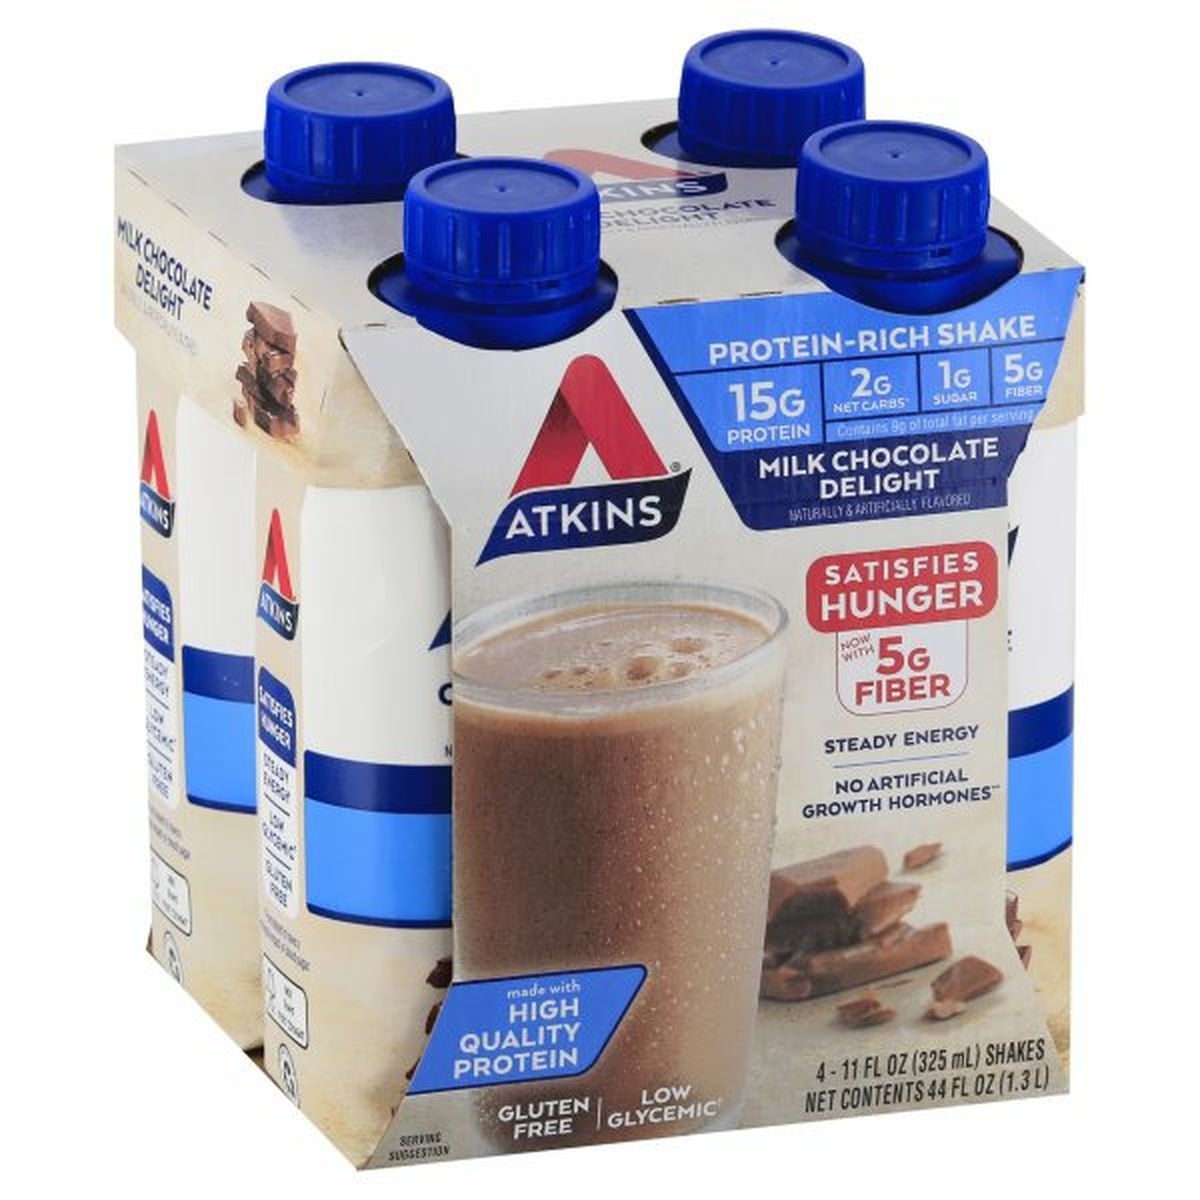 Calories in Atkins Protein-Rich Shake, Milk Chocolate Delight